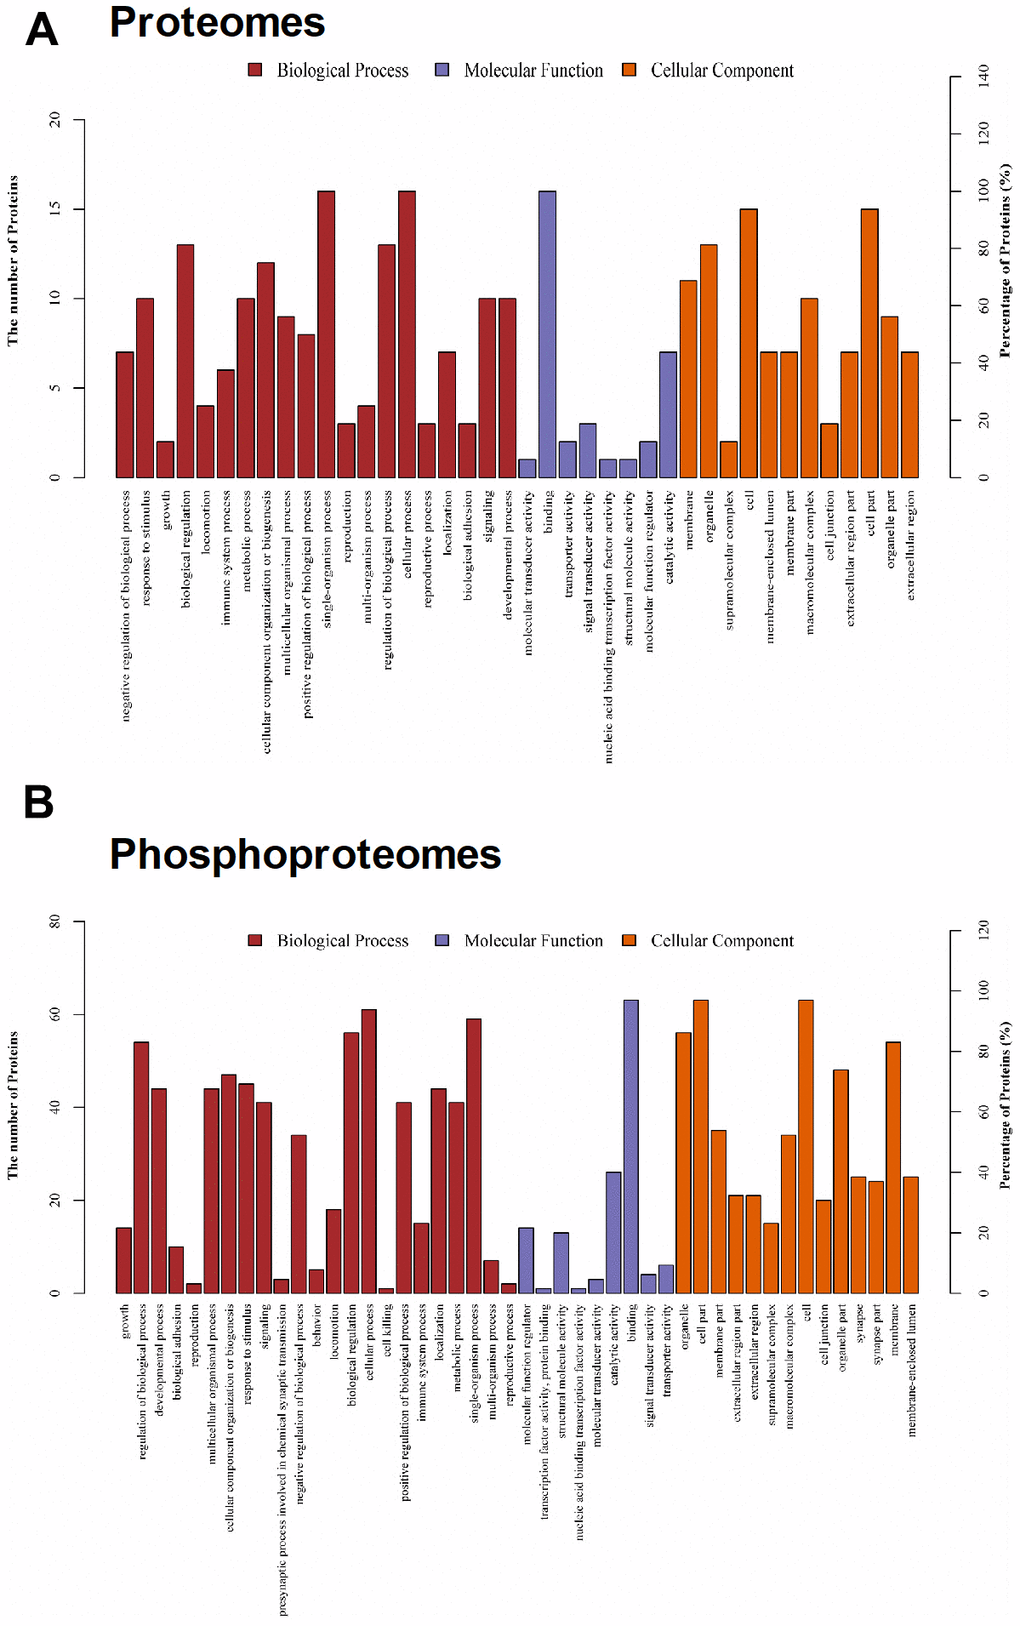 Gene ontology (GO) classification for differentially expressed proteins. (A) For proteomes, populations of proteins that showed alteredexpression are indicated based on their GO for molecular function, biological process, and cellular components. (B) For phosphoproteomes, populations of proteins that showed alteredexpression are indicated based on their GO for molecular function, biological process, and cellular components.